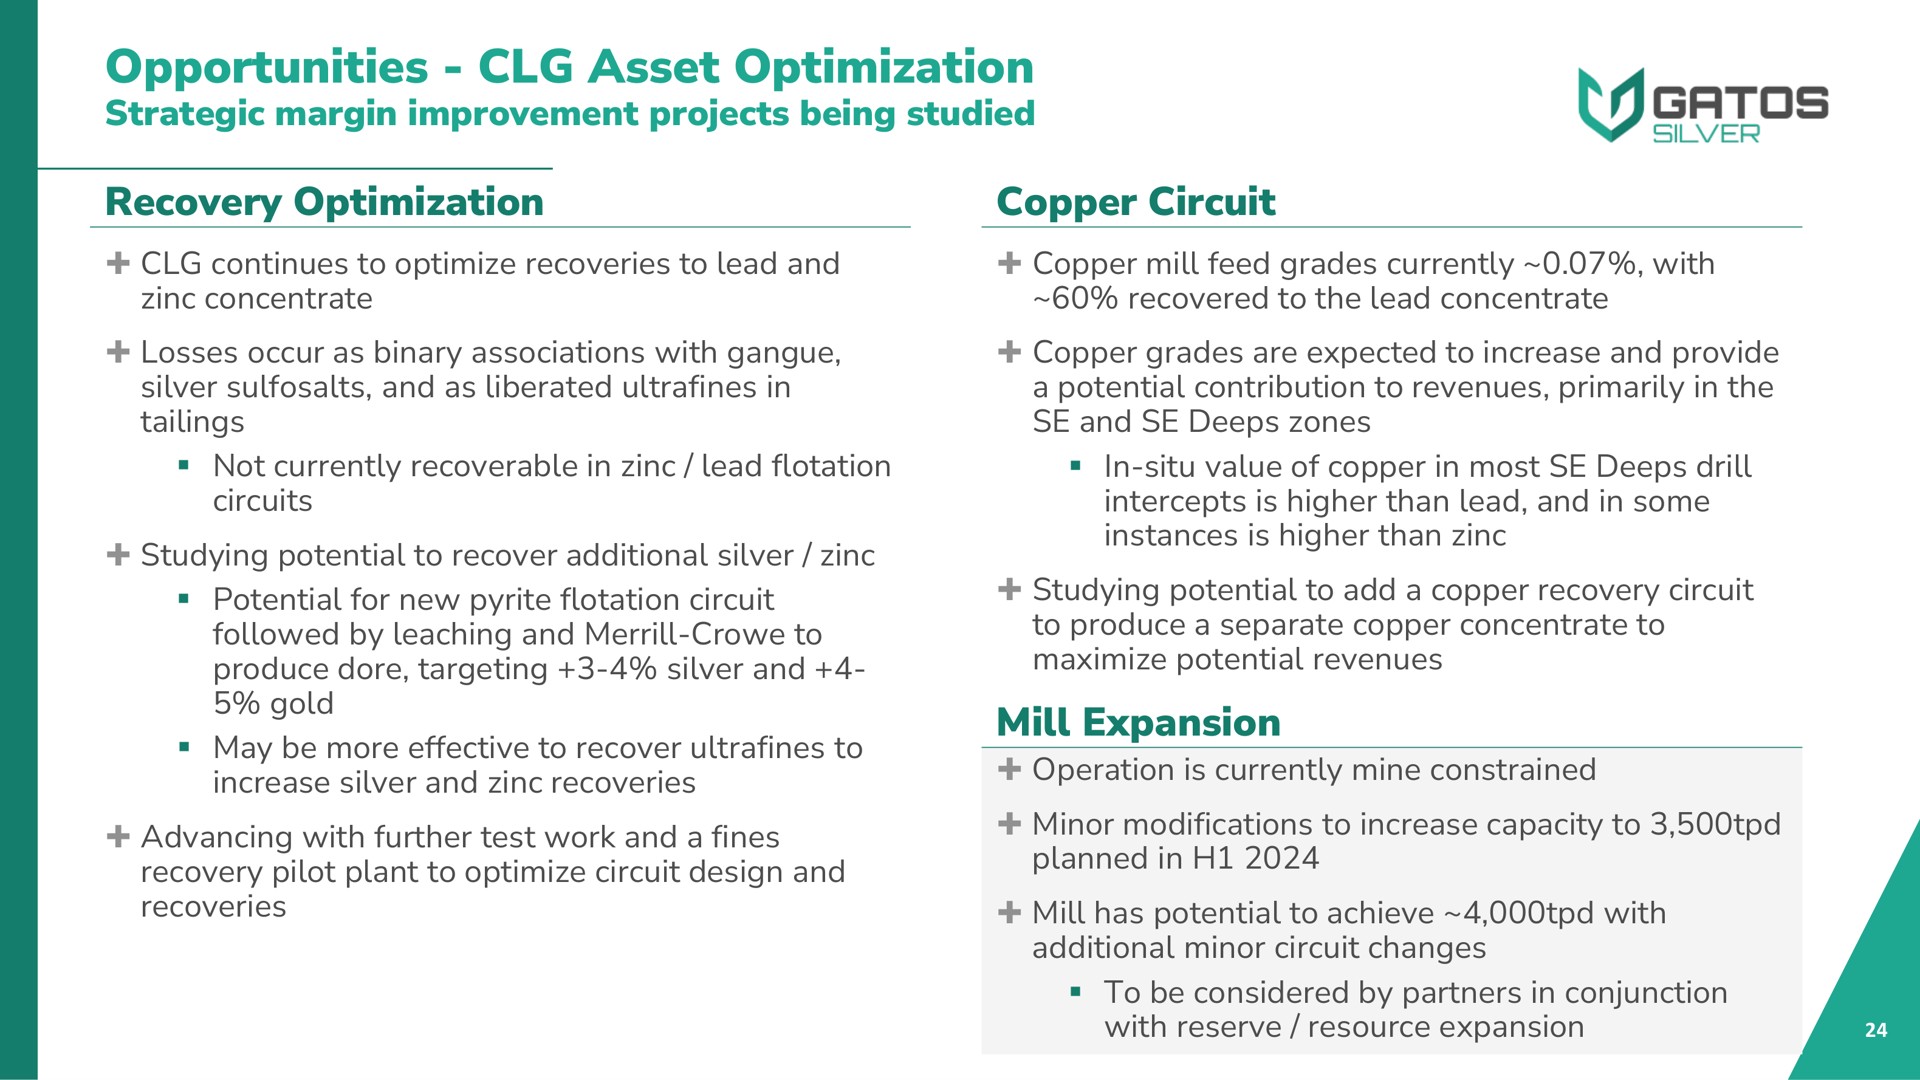 opportunities asset optimization strategic margin improvement projects being studied recovery optimization copper circuit mill expansion | Gatos Silver